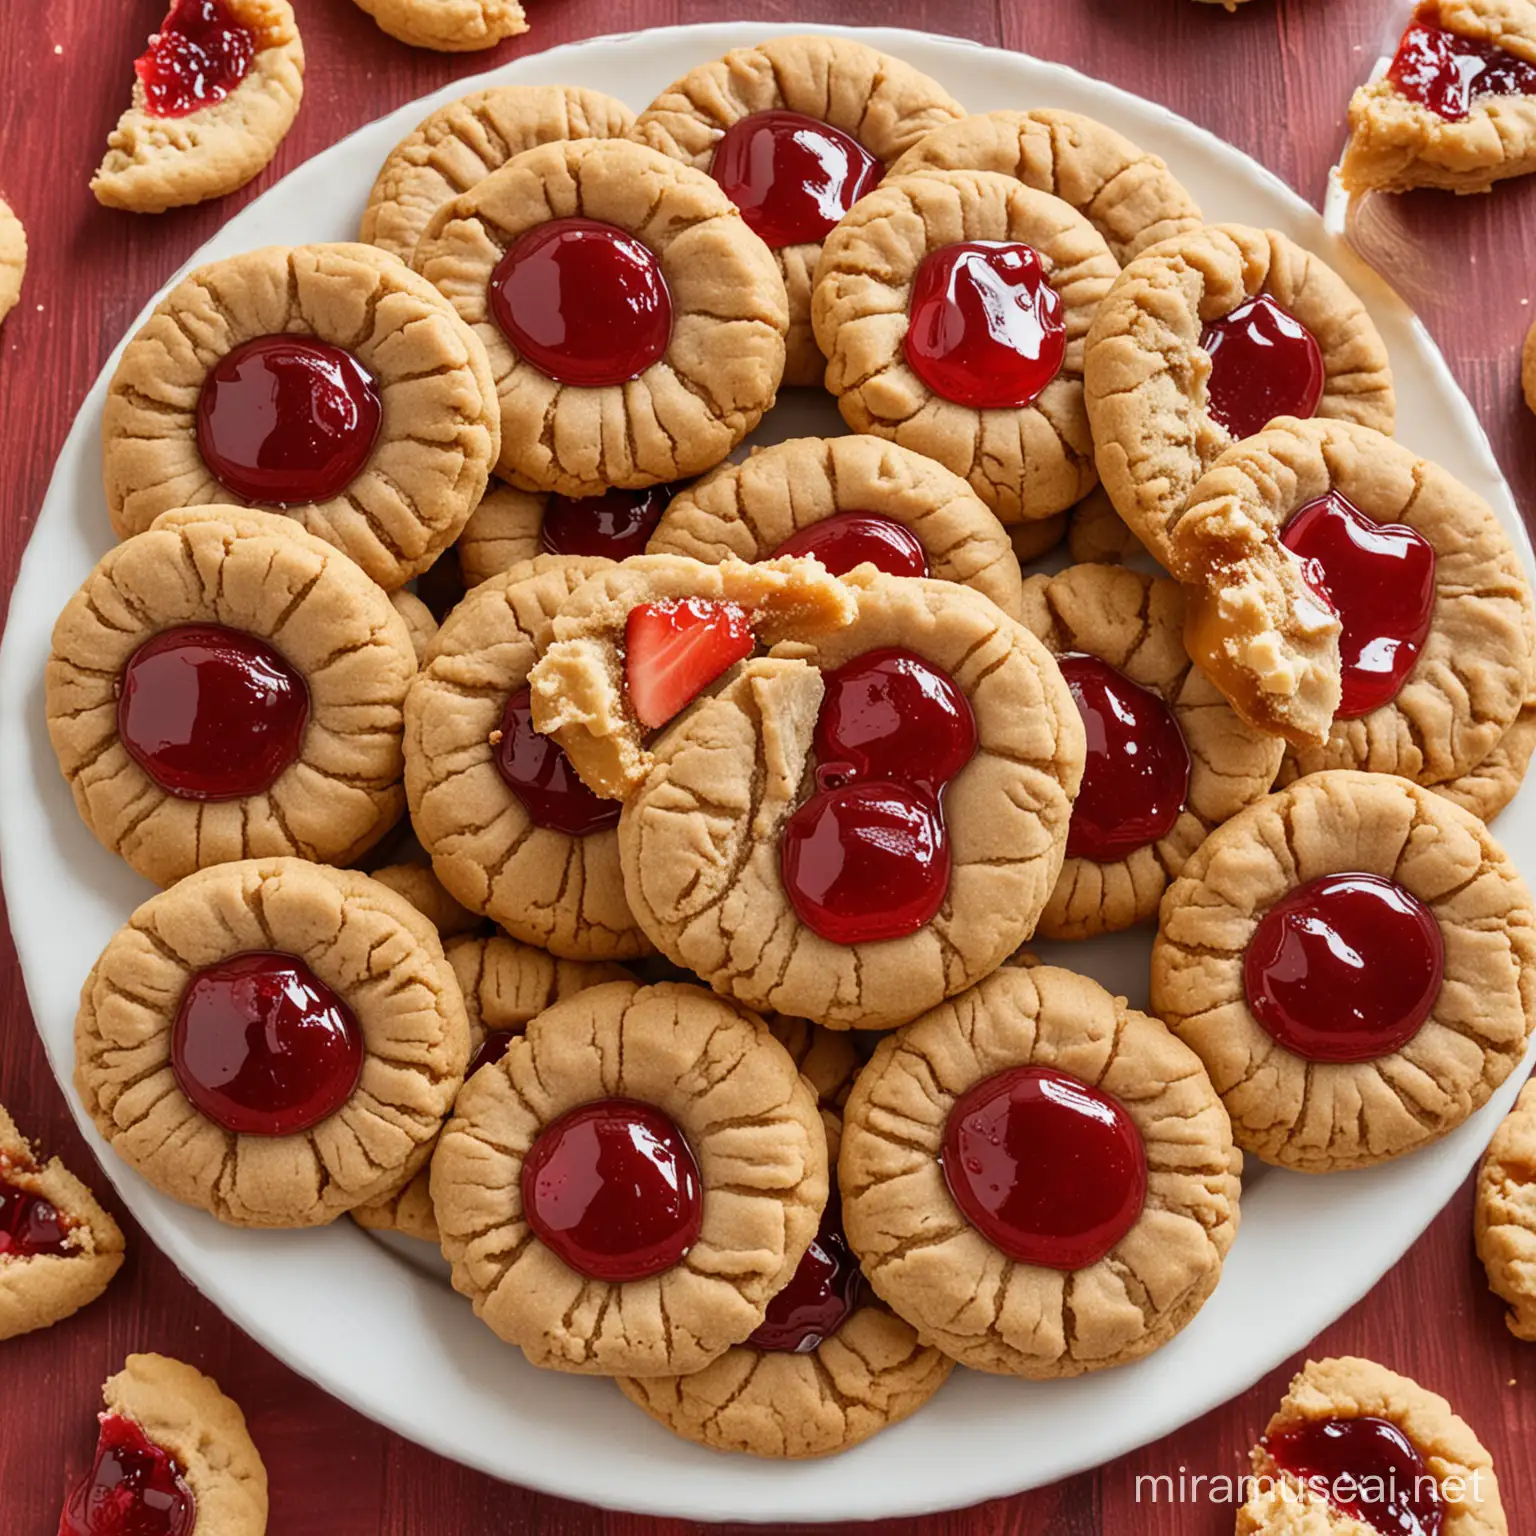 Peanut Butter Cookies with Strawberry Jelly Filling